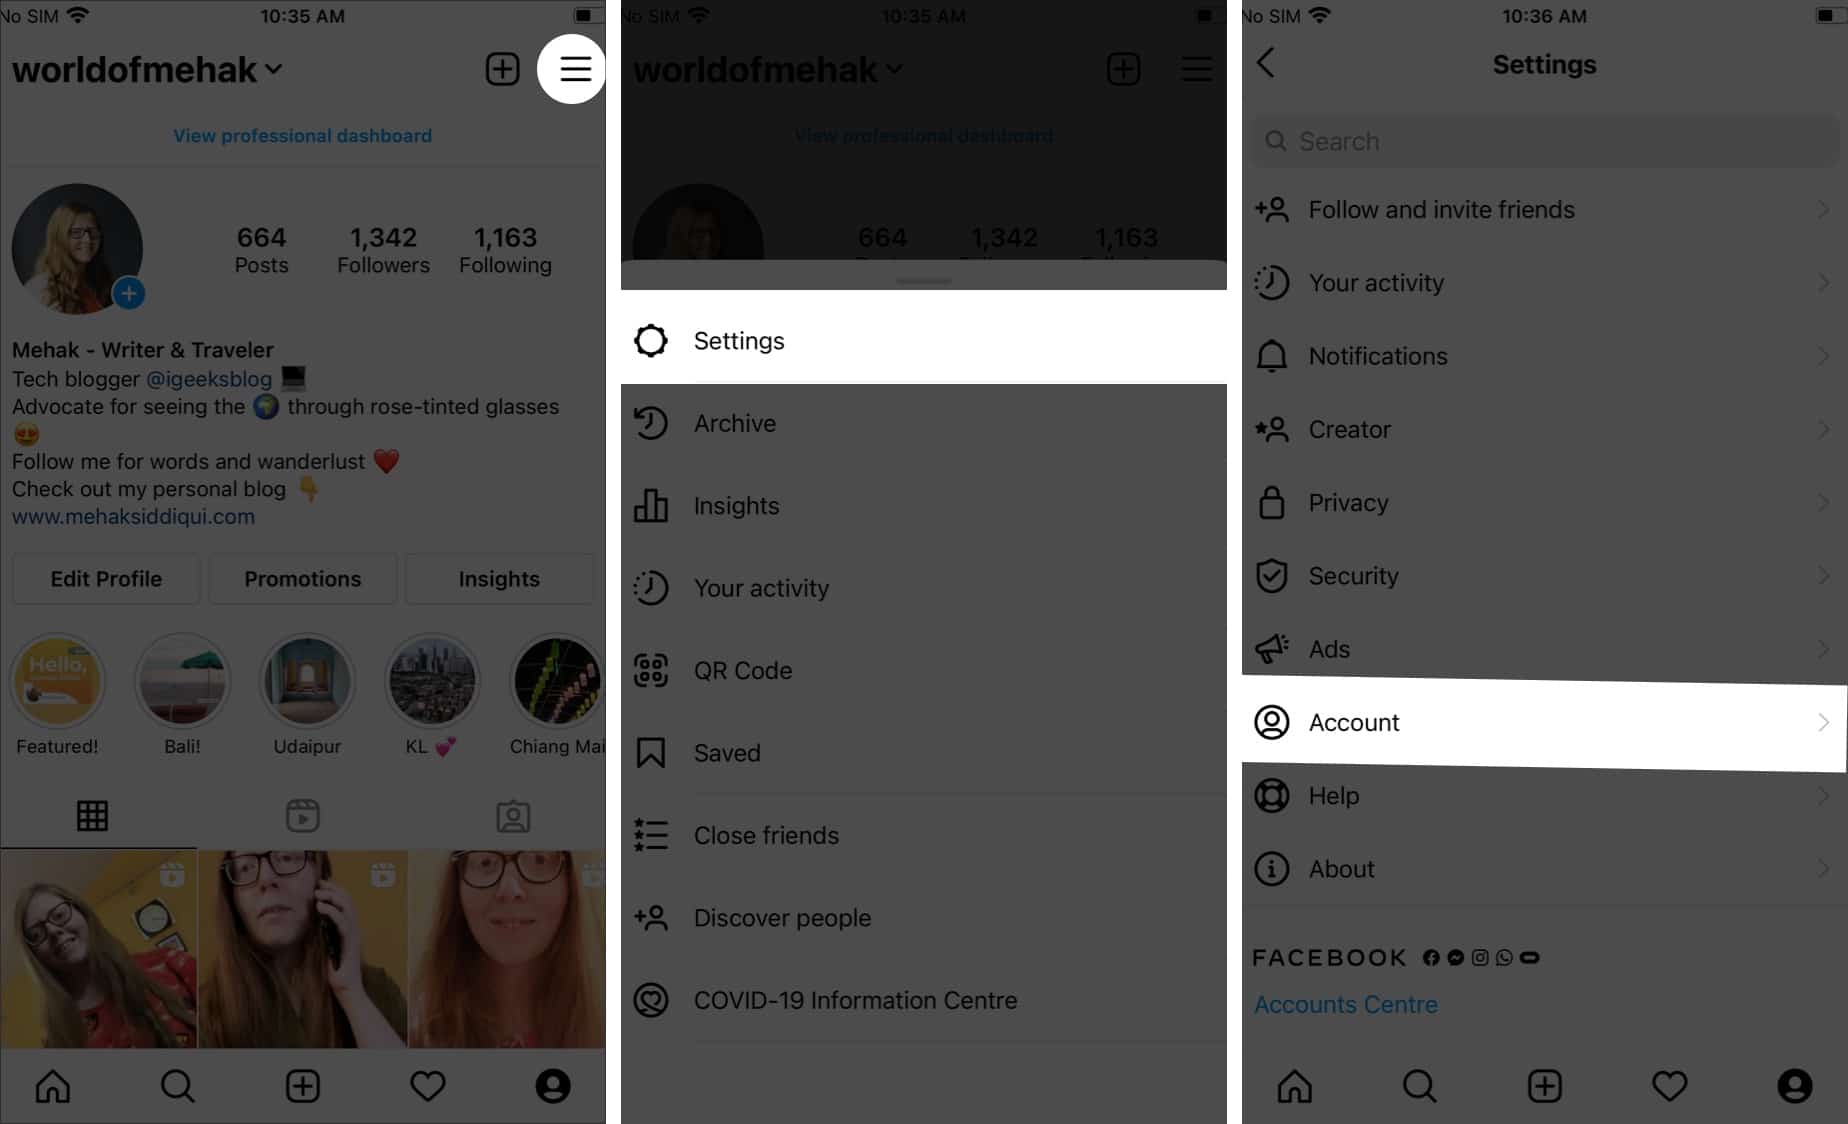 Go to Instagram Settings and tap on Account